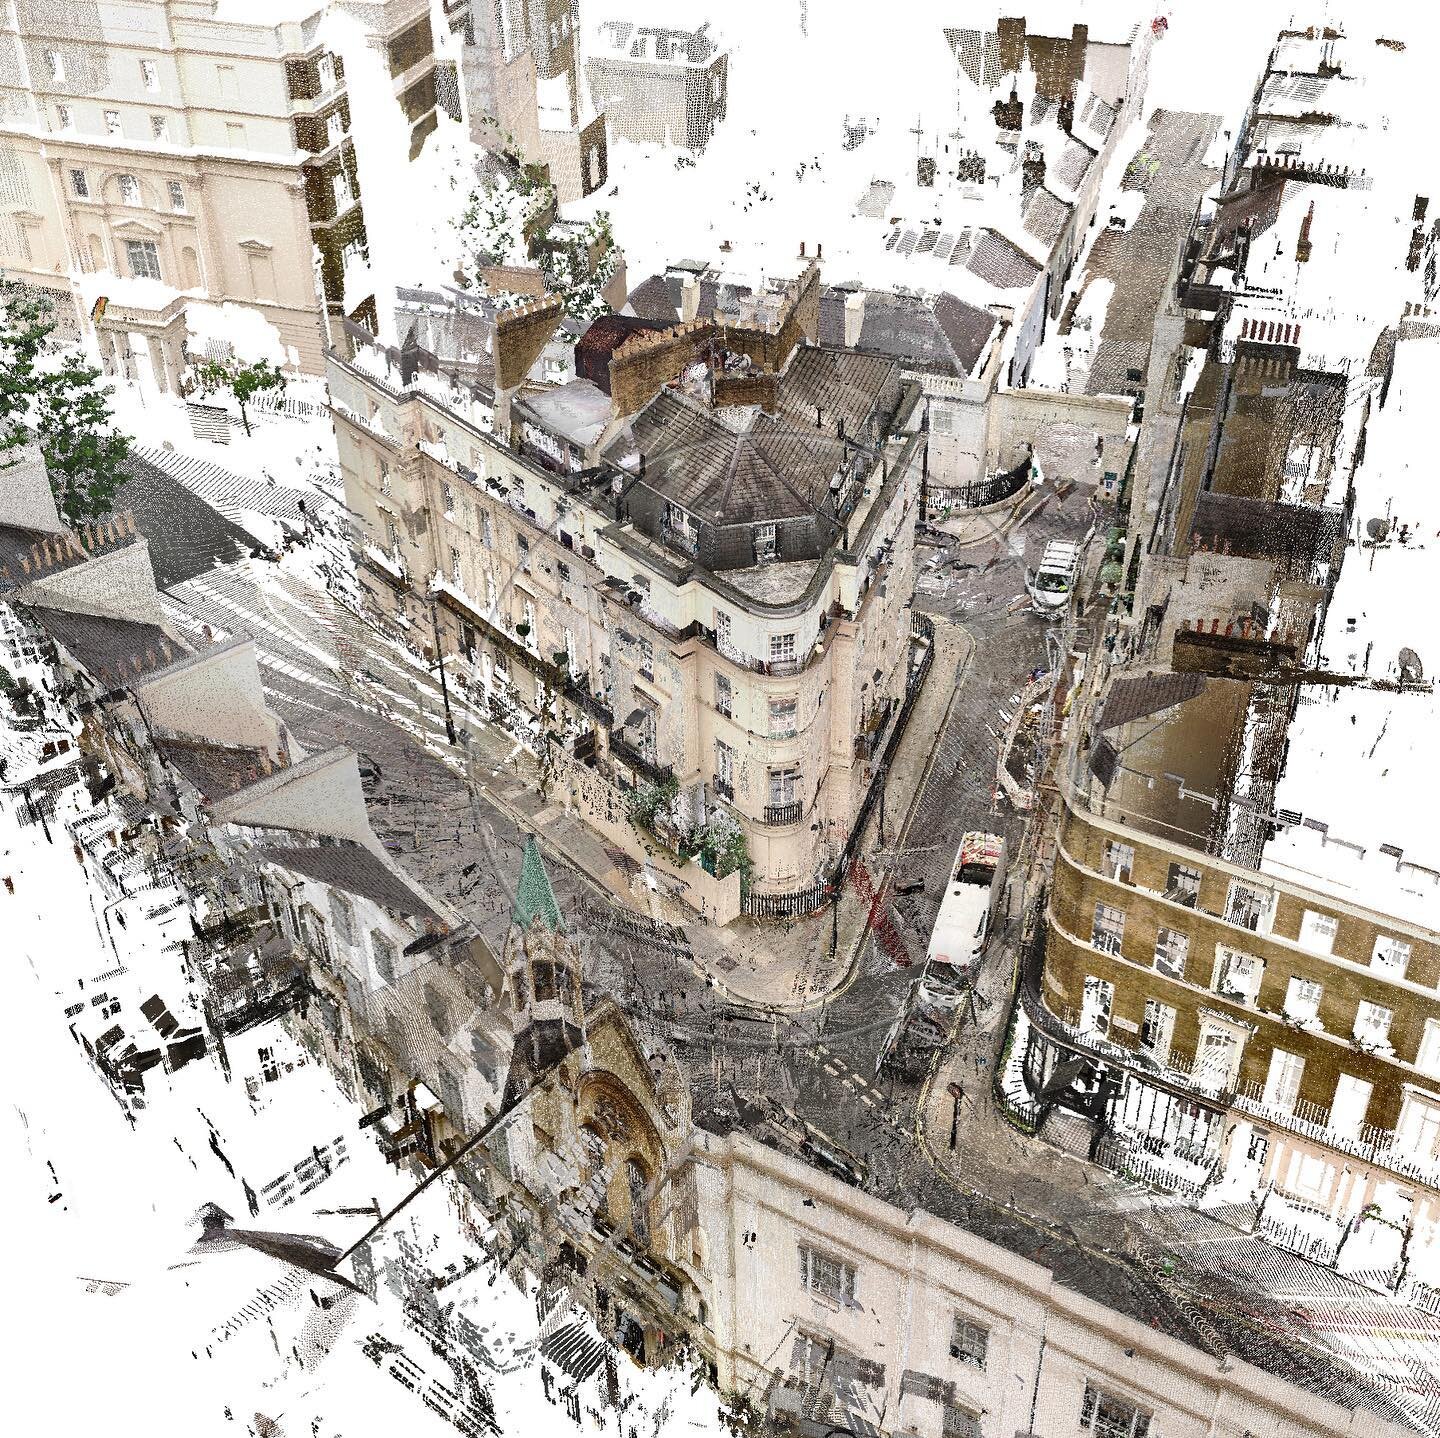 A sneak peek of the point cloud data captured at our recent Belgravia survey 😎